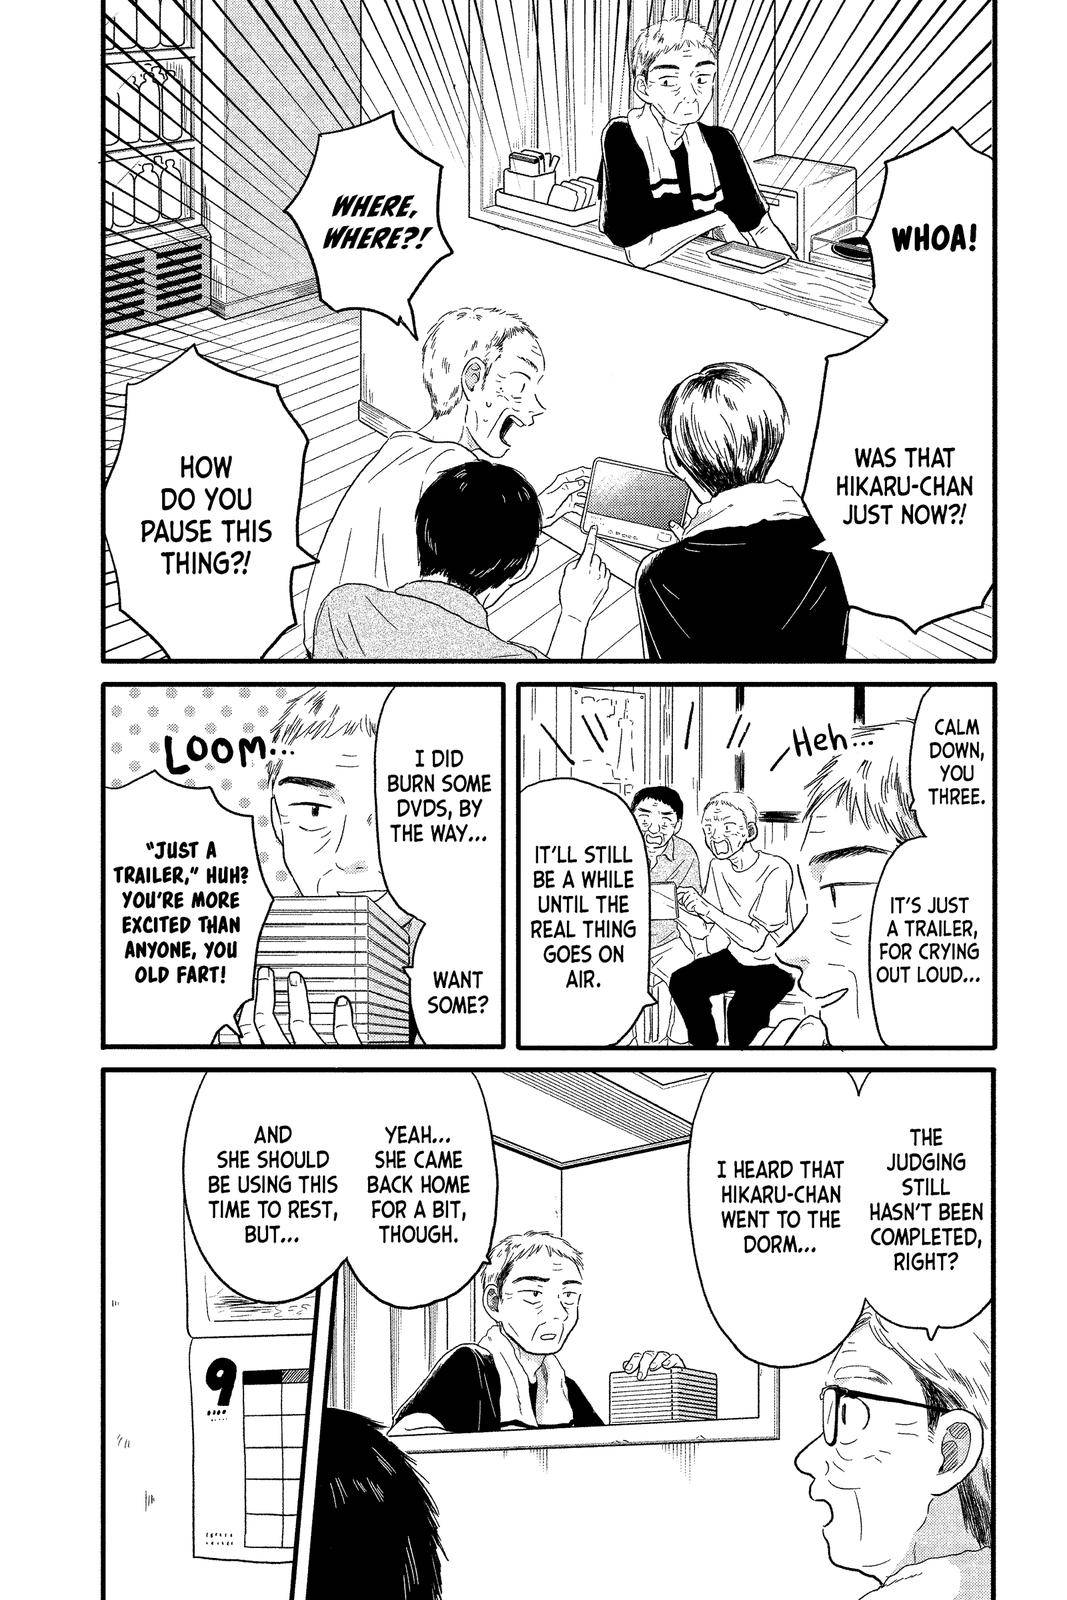 Hikaru In The Light! - chapter 20 - #2